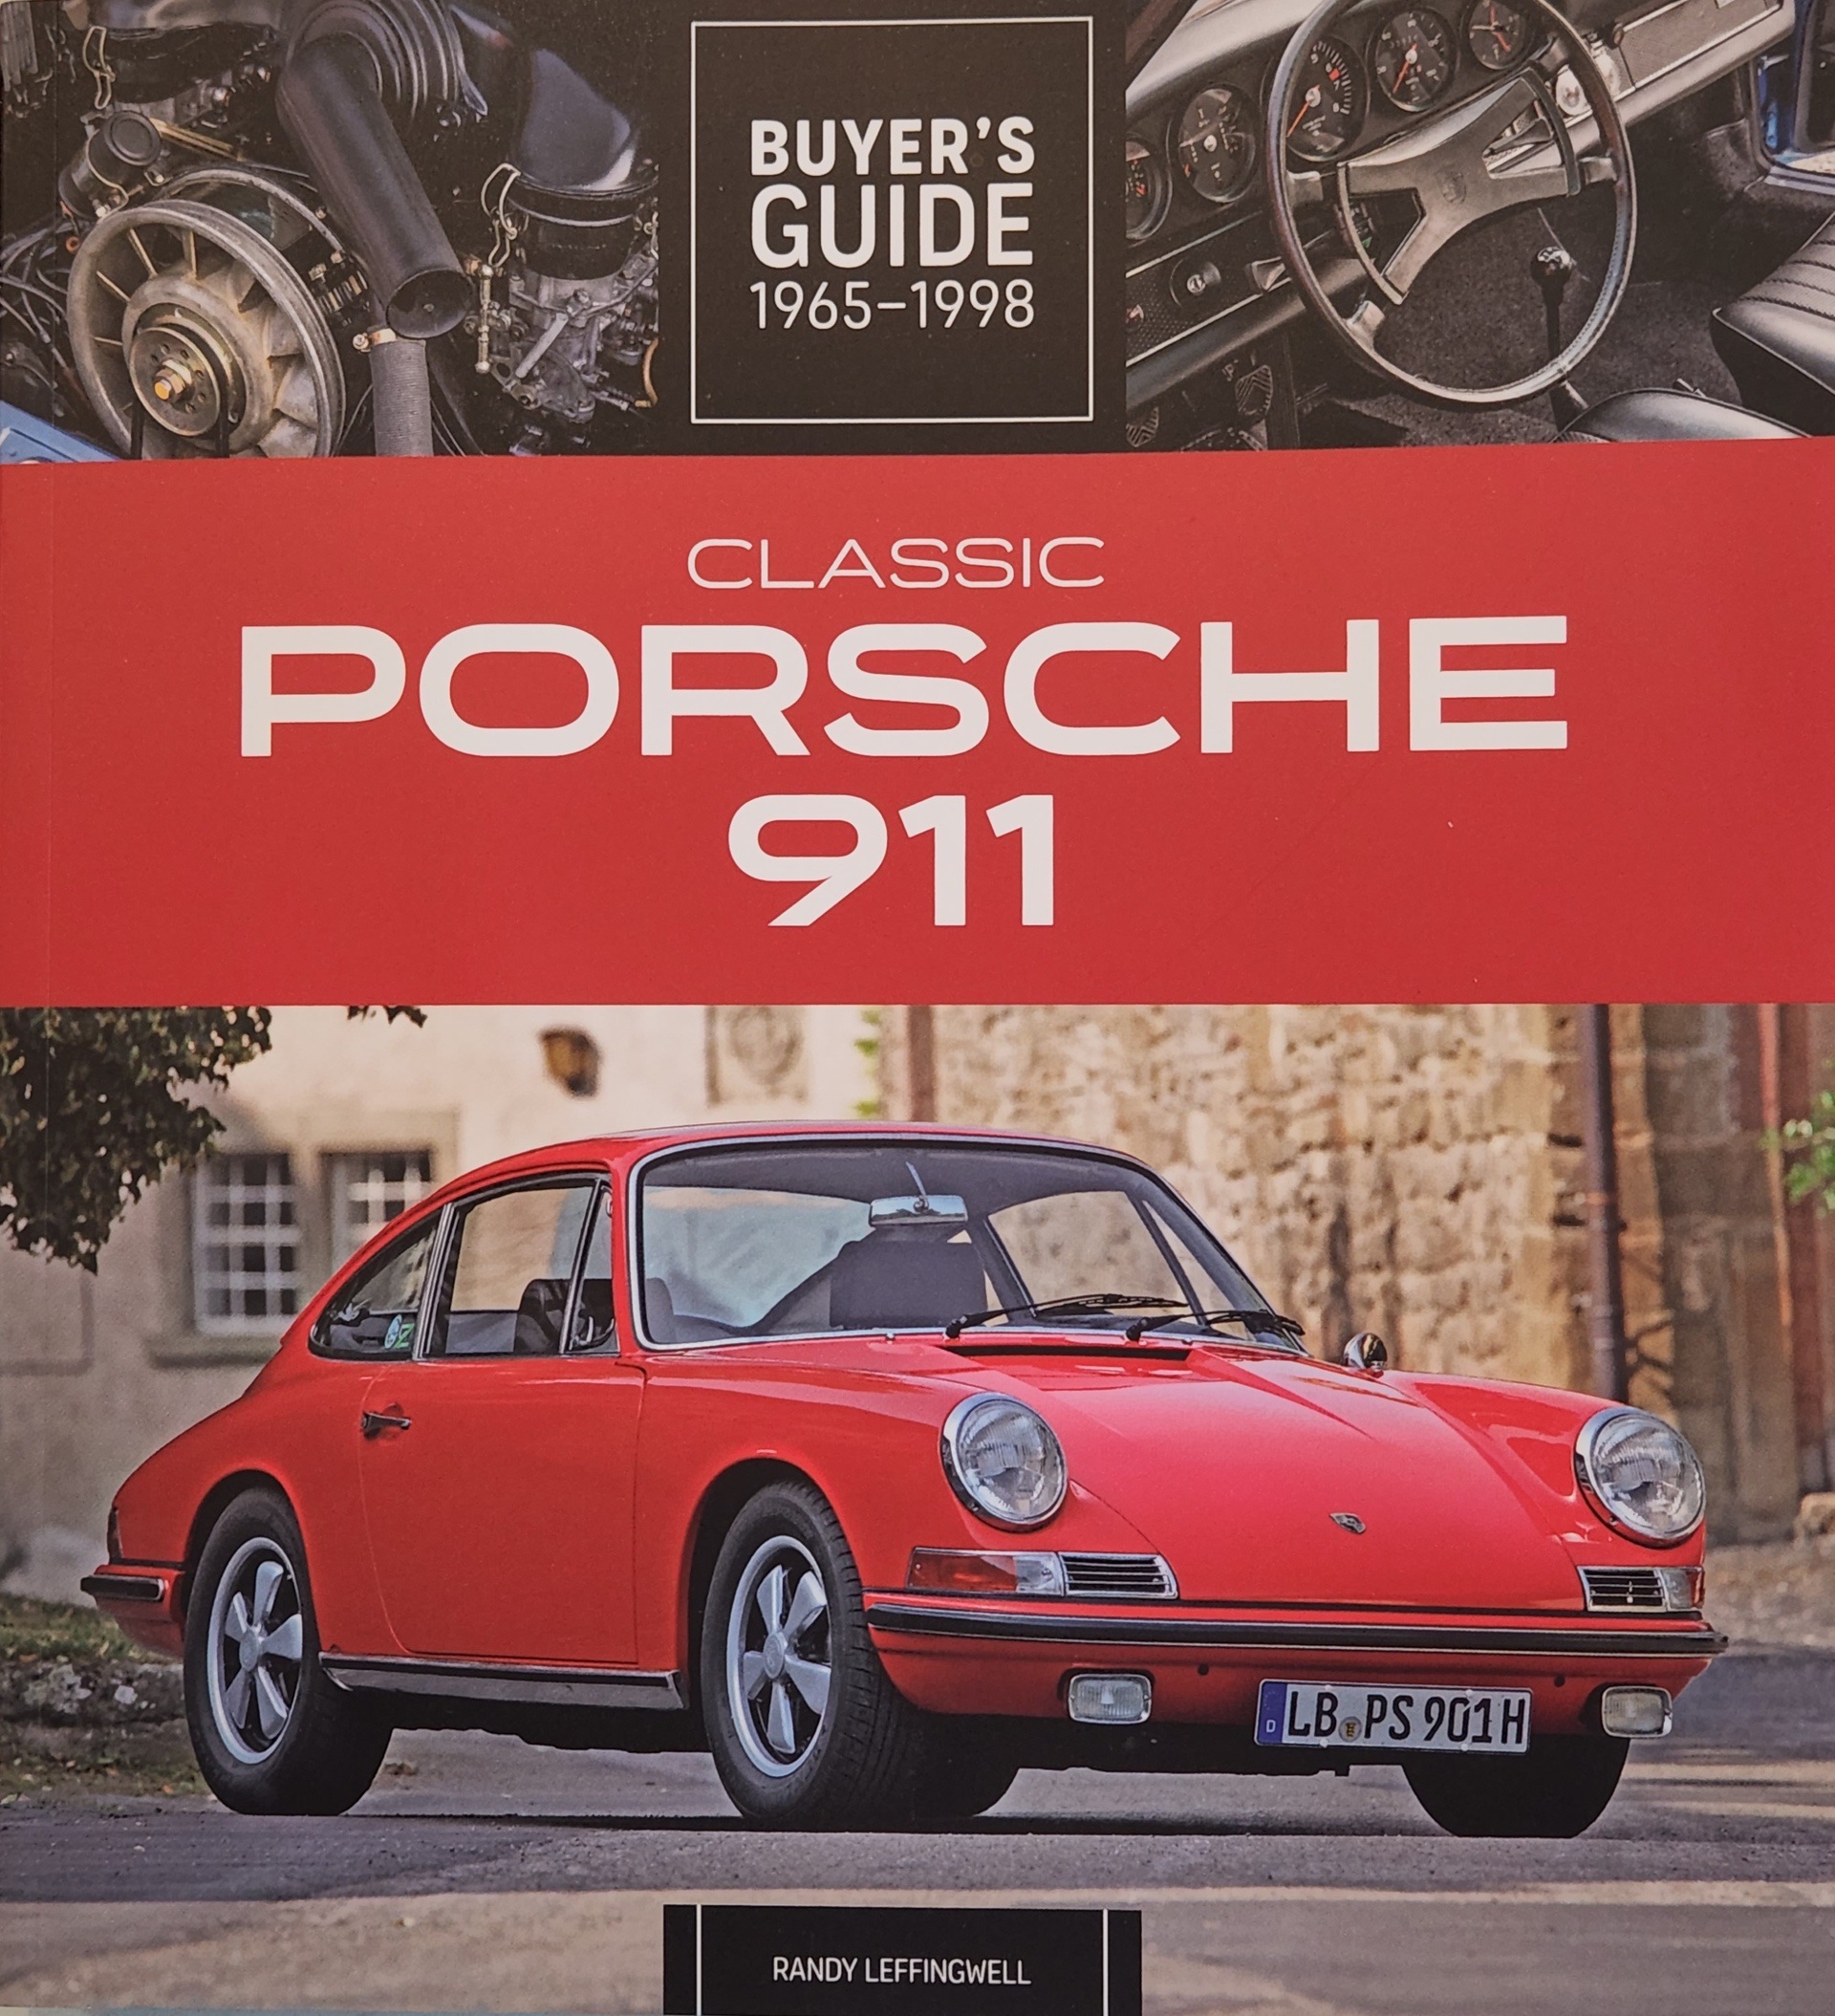 Cover of Classic Porsche 911 Buyer’s guide by Randy Leffingwell